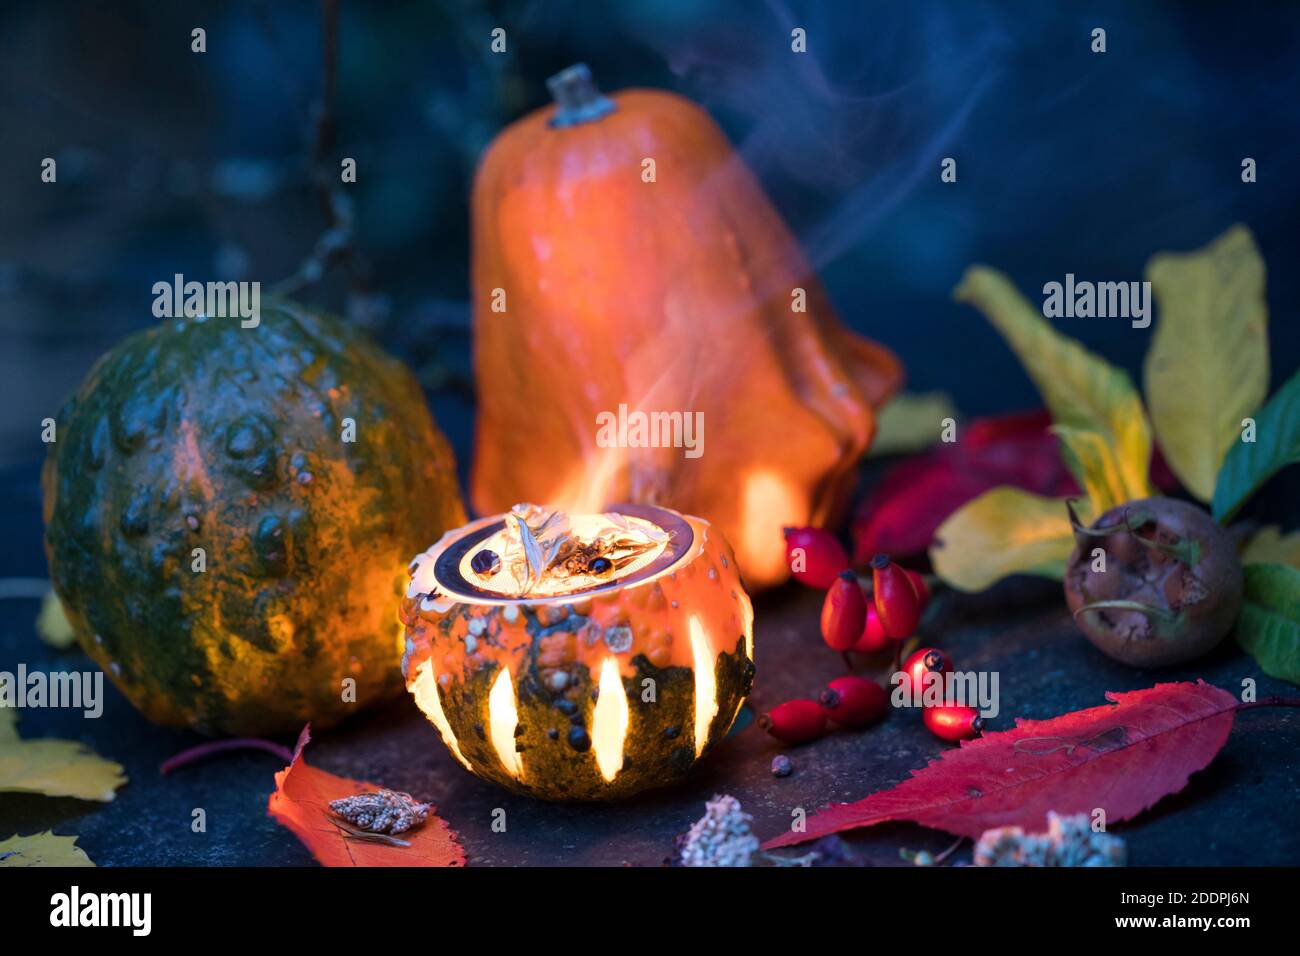 Smoking with aromatic herbs in a pumpkin with a tea light, Germany Stock Photo